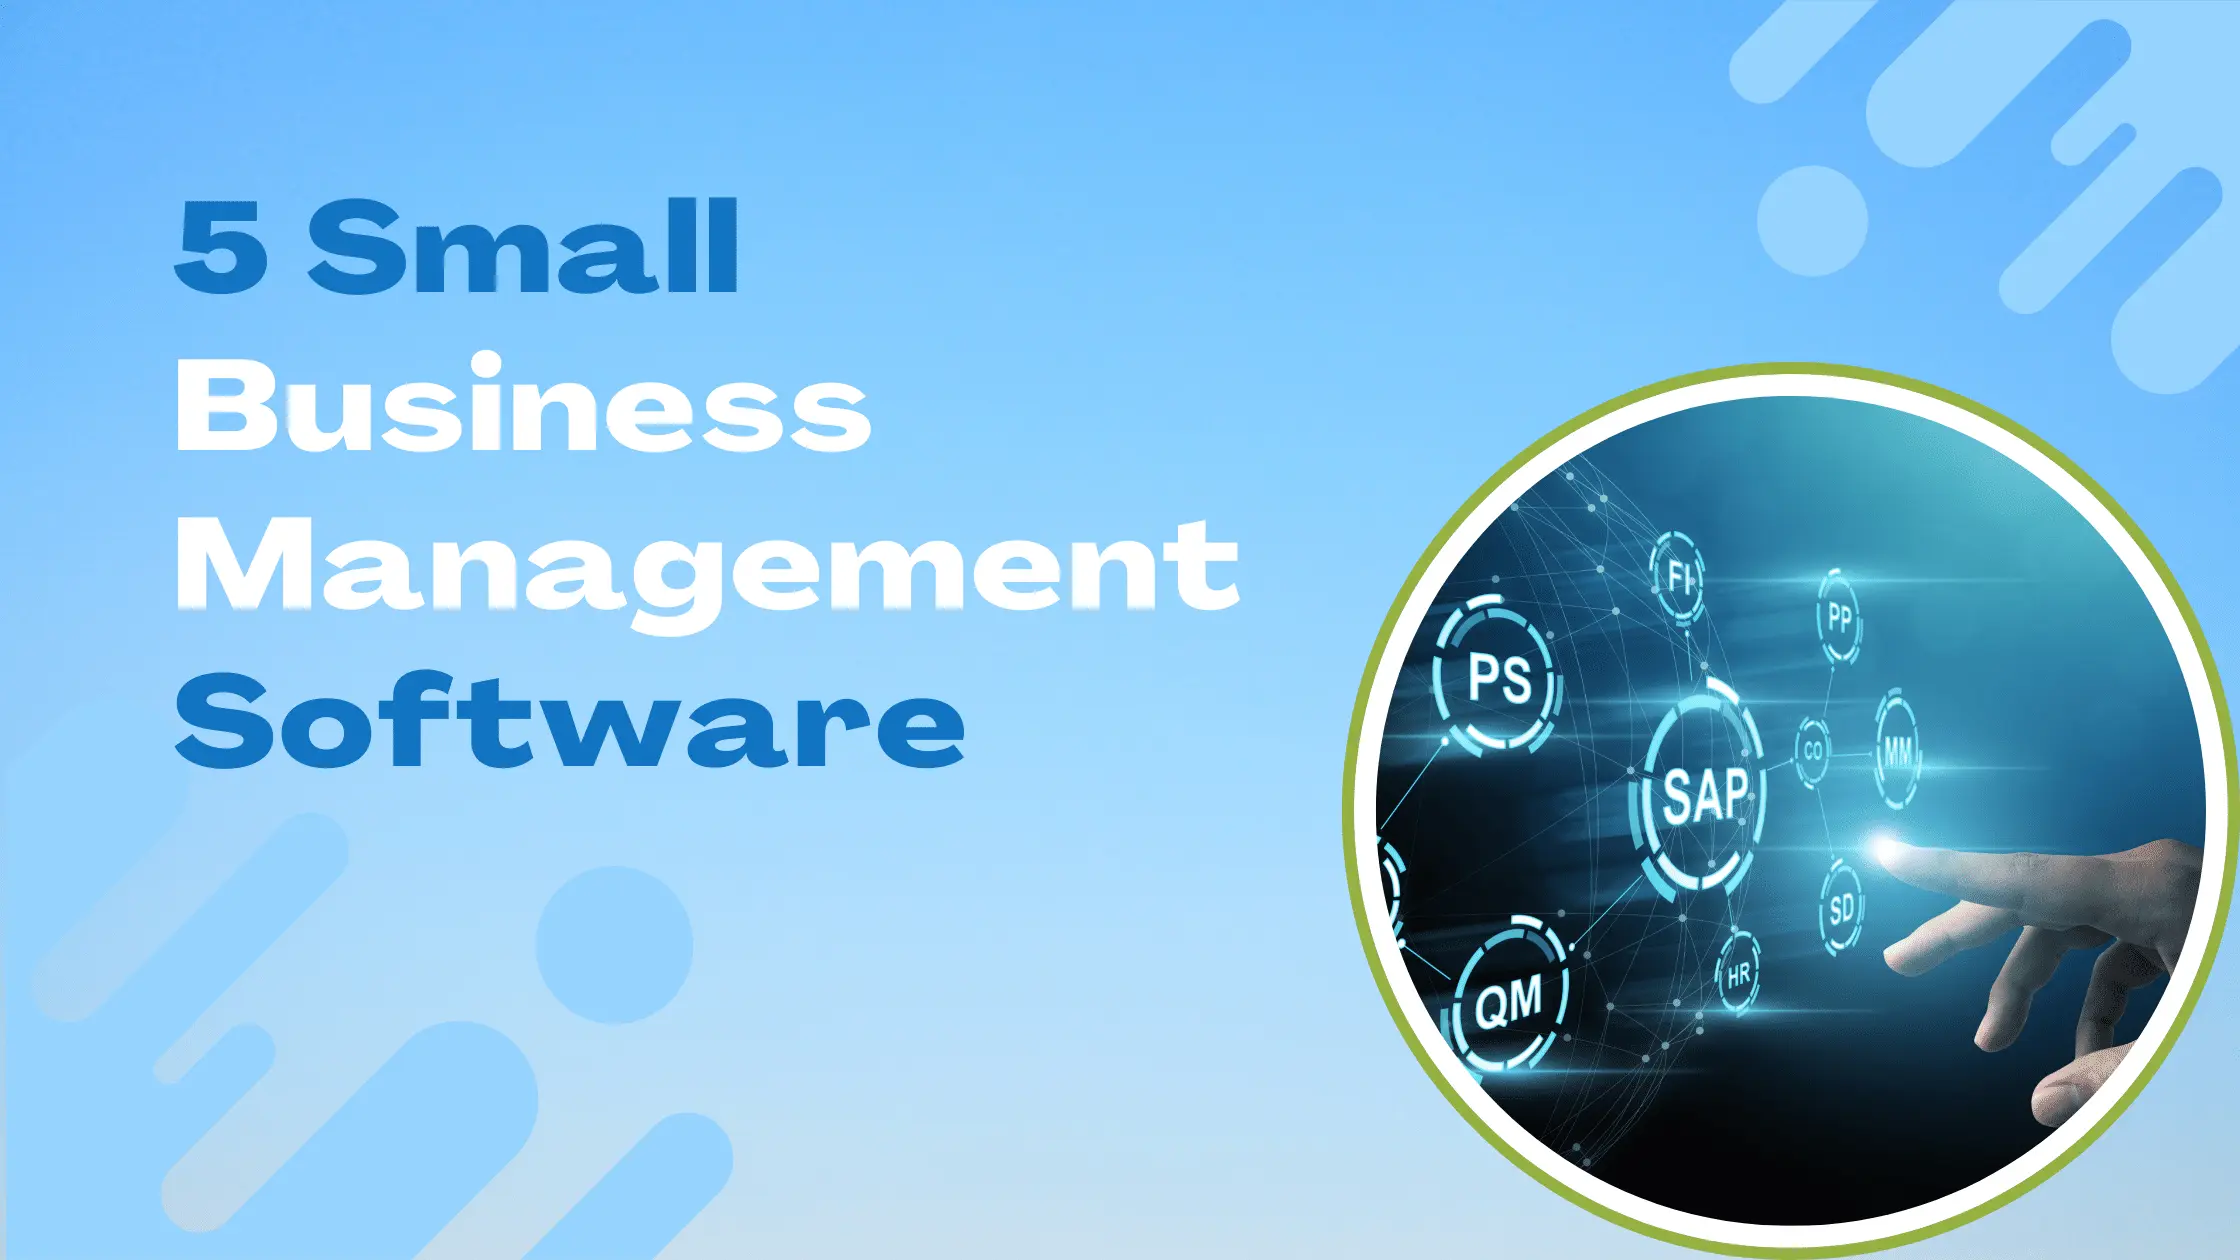 5 Small Business Management Software (Free & Paid) - ShareEcard